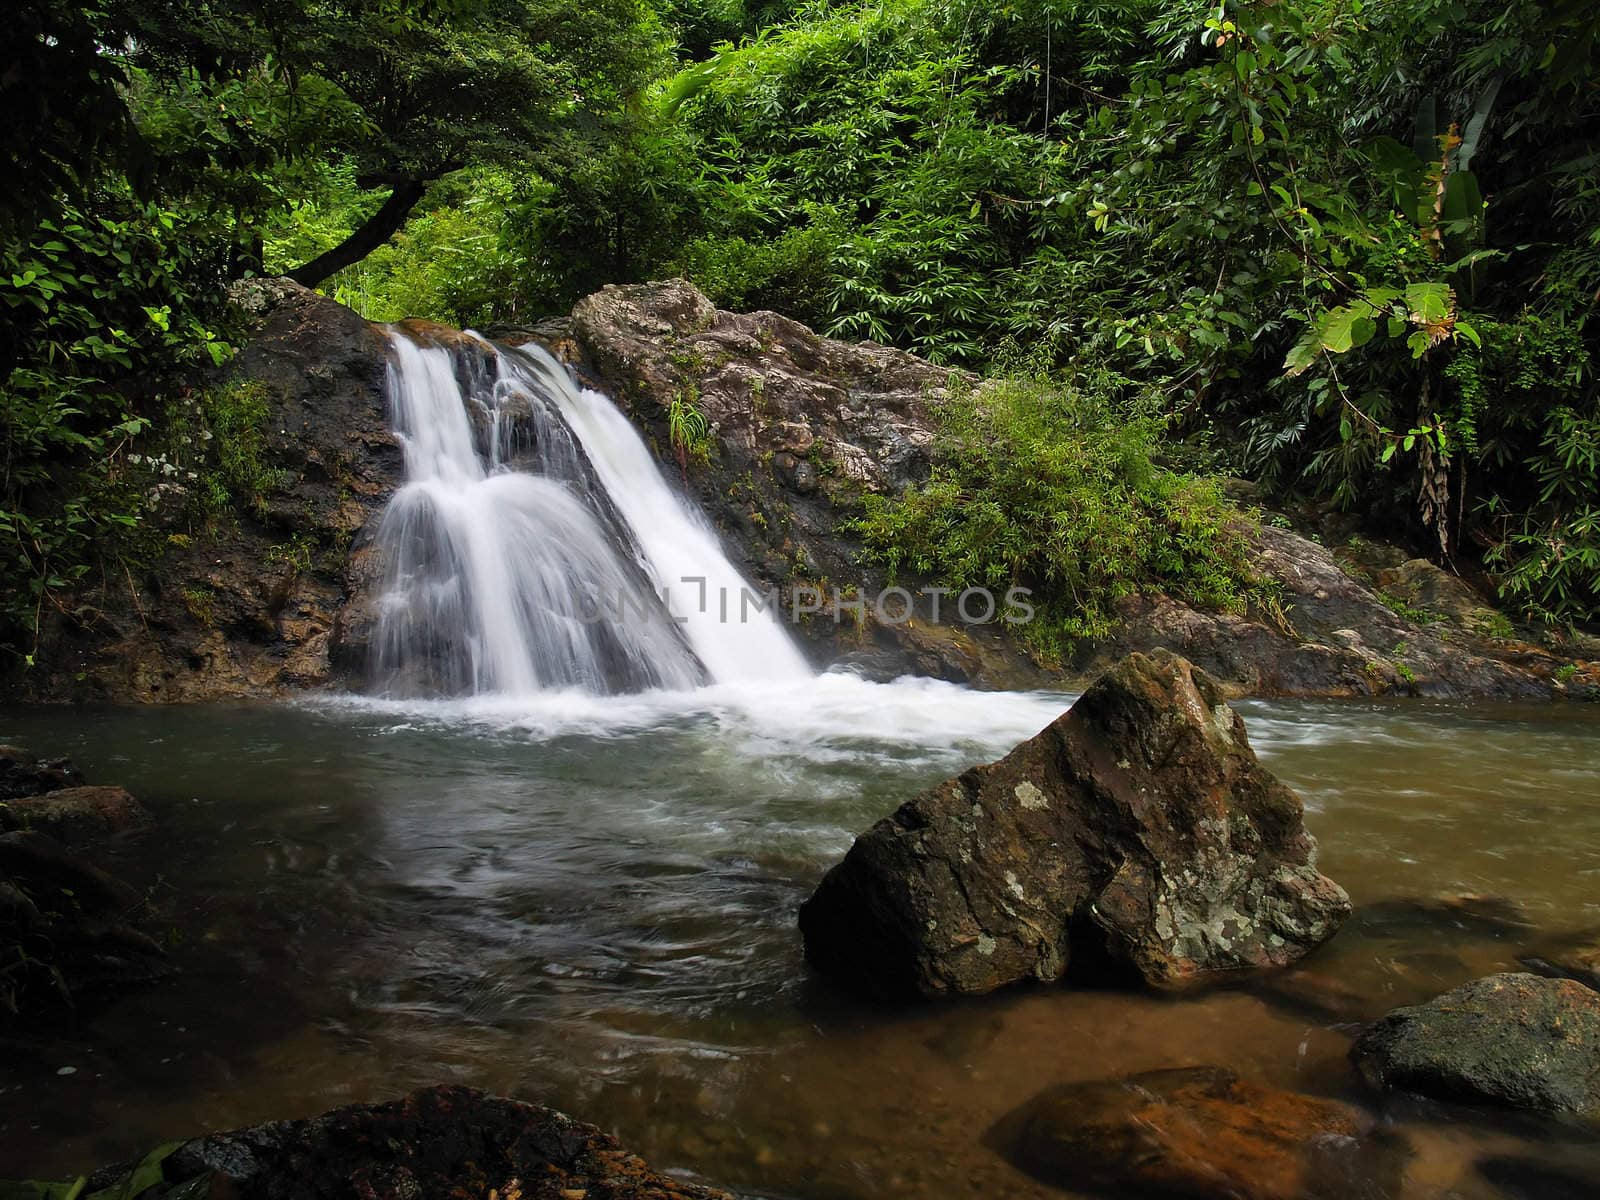 Some floor of Sarika waterfall, Khao Yai National Park, Nakhon Nayok, Thailand. This national park is elect as world heritage forest complex from UNESCO